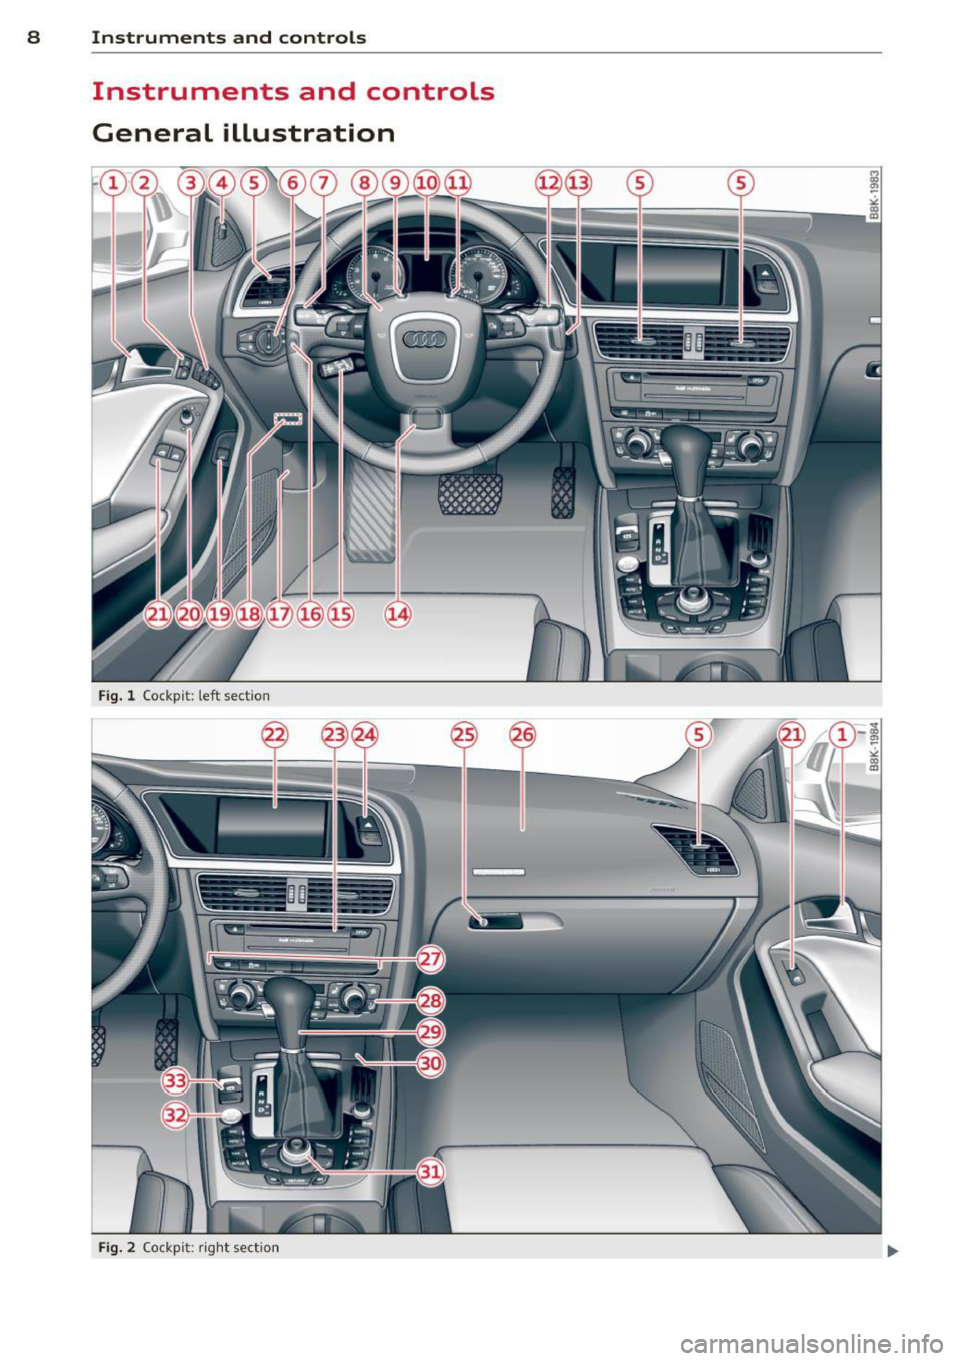 AUDI A5 COUPE 2012  Owners Manual 8  Instruments and controls 
Instruments  and  controls 
General  illustration 
Fig. l Cockp it:  left  sect io n 
Fig. 2 Co ck pi t: ri ght  sect io n  